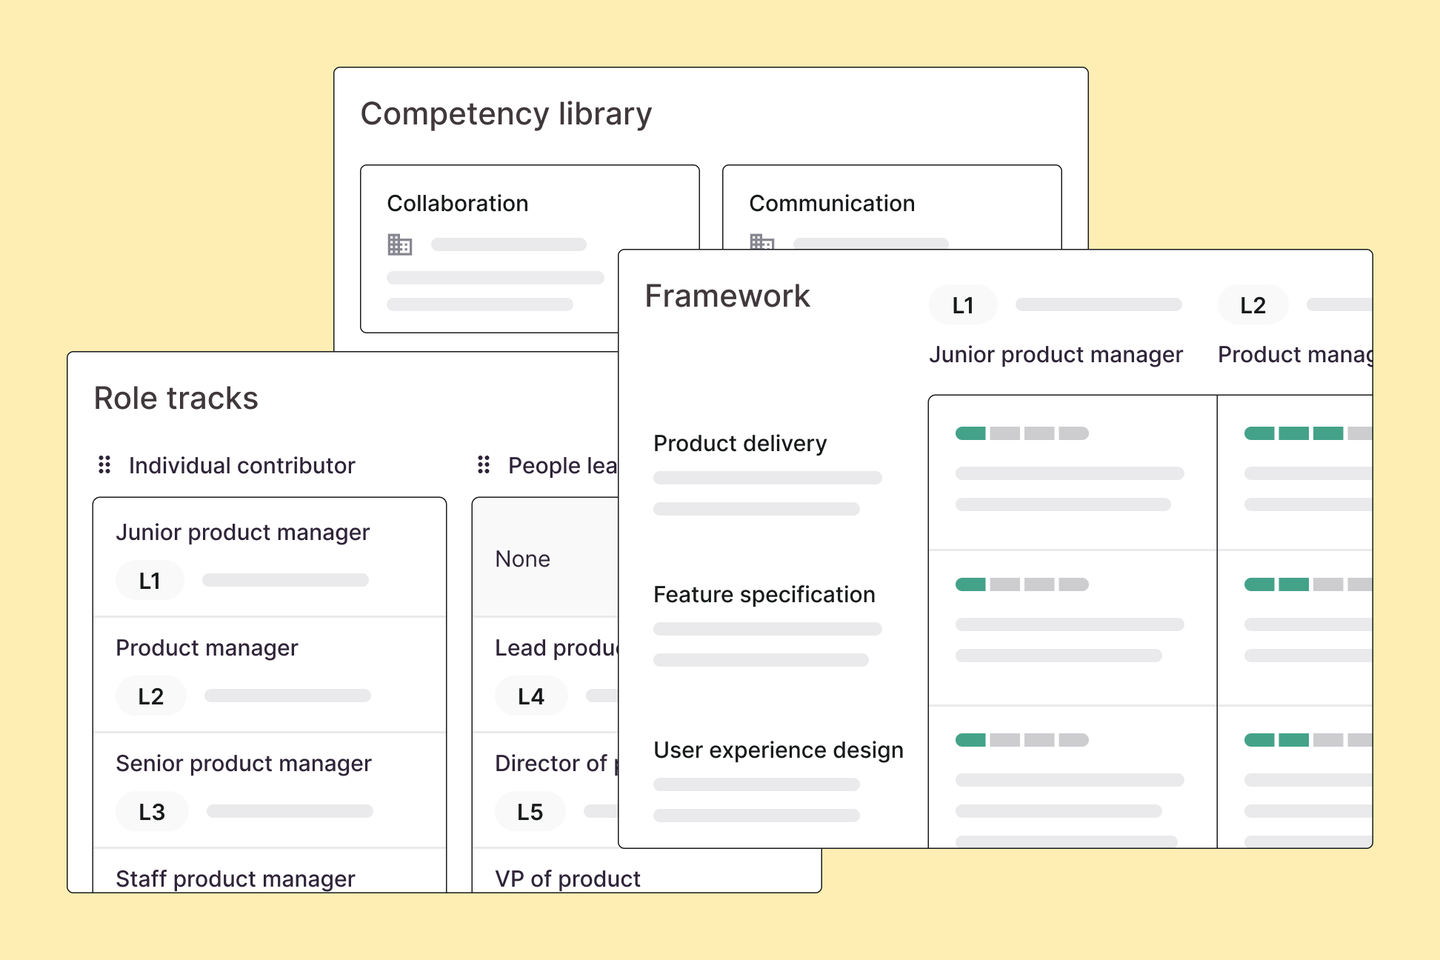 Illustration of Culture Amp platform showing several new features in Career Paths: Competency library, role tracks, and framework